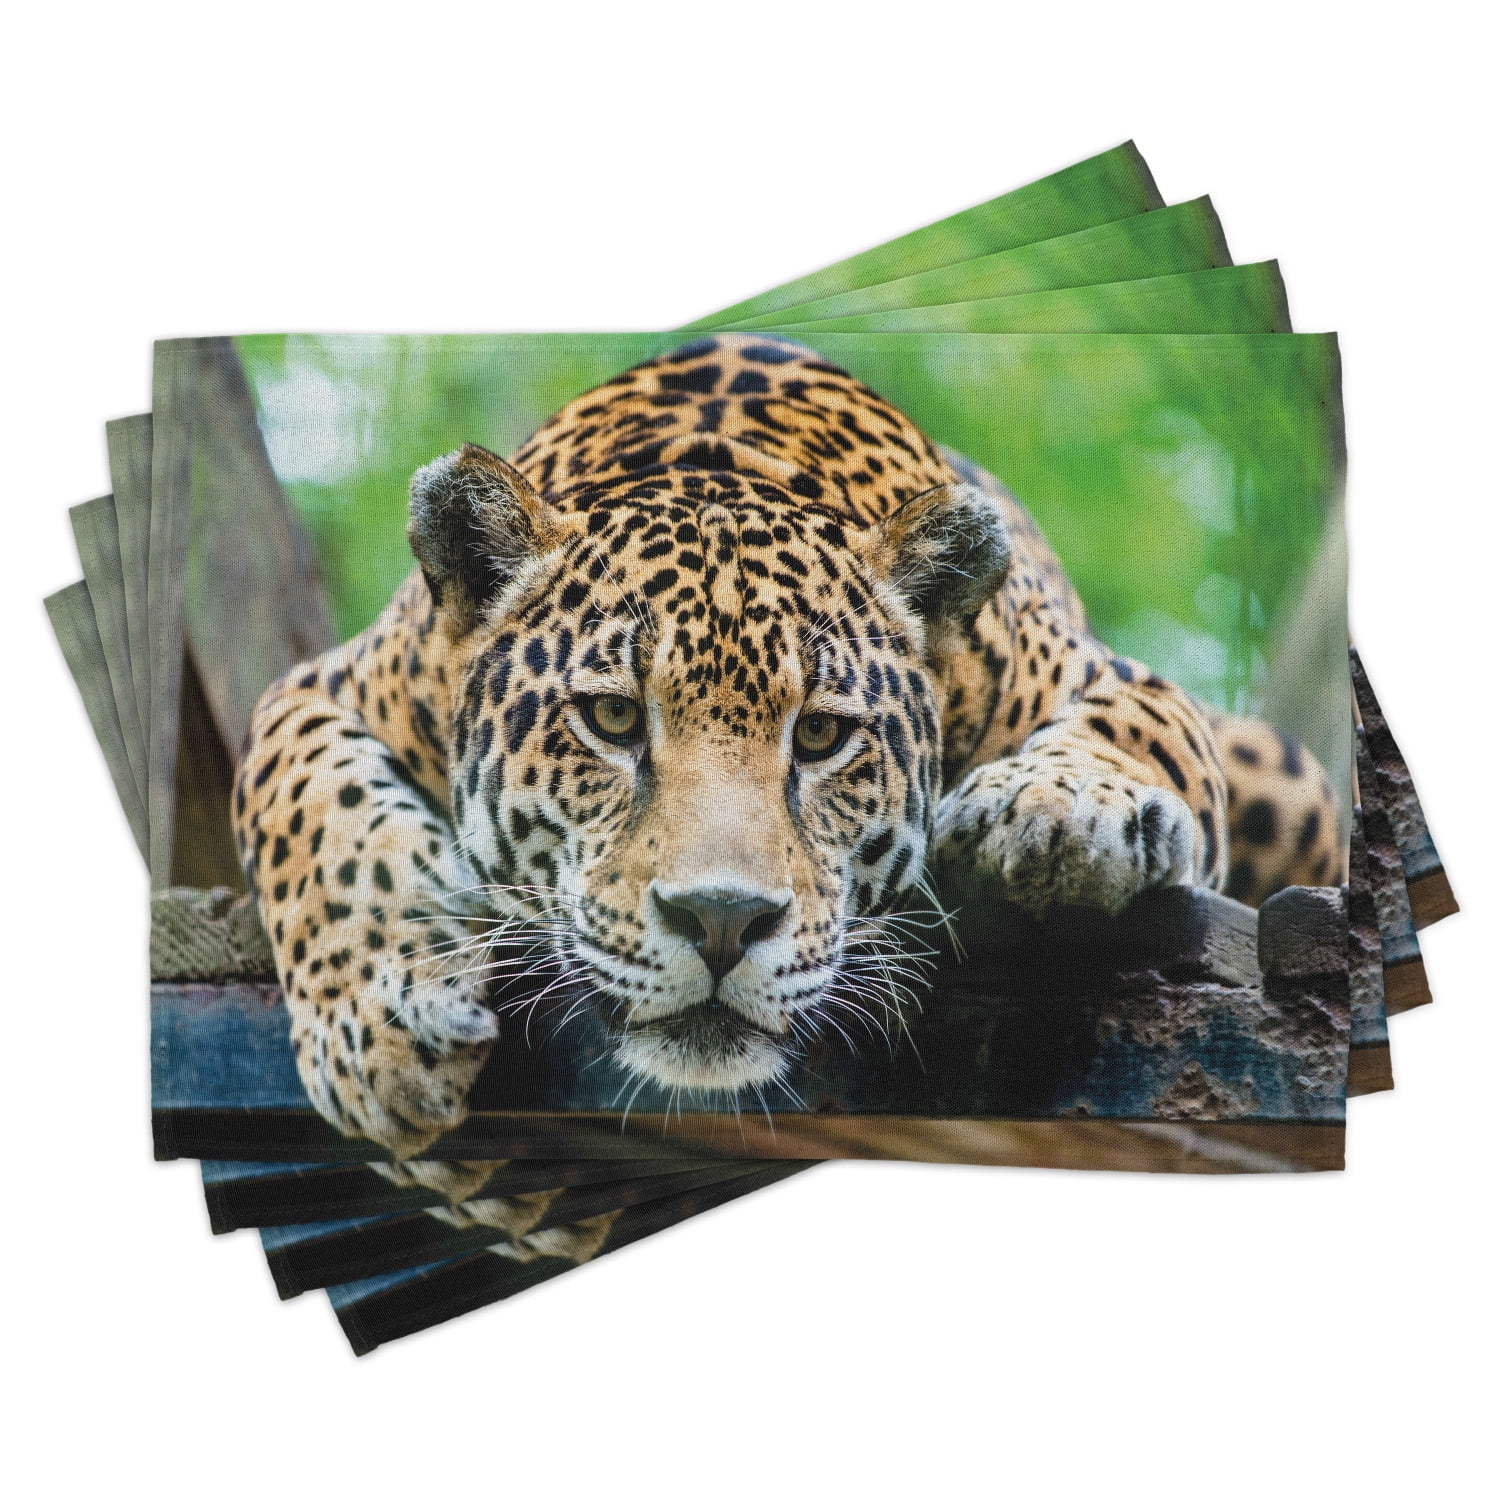 Jungle Placemats Set of 4 South American Jaguar Wild Animal Carnivore  Endangered Feline Safari Image, Washable Fabric Place Mats for Dining Room  Kitchen Table Decor,Orange Black Green, by Ambesonne 